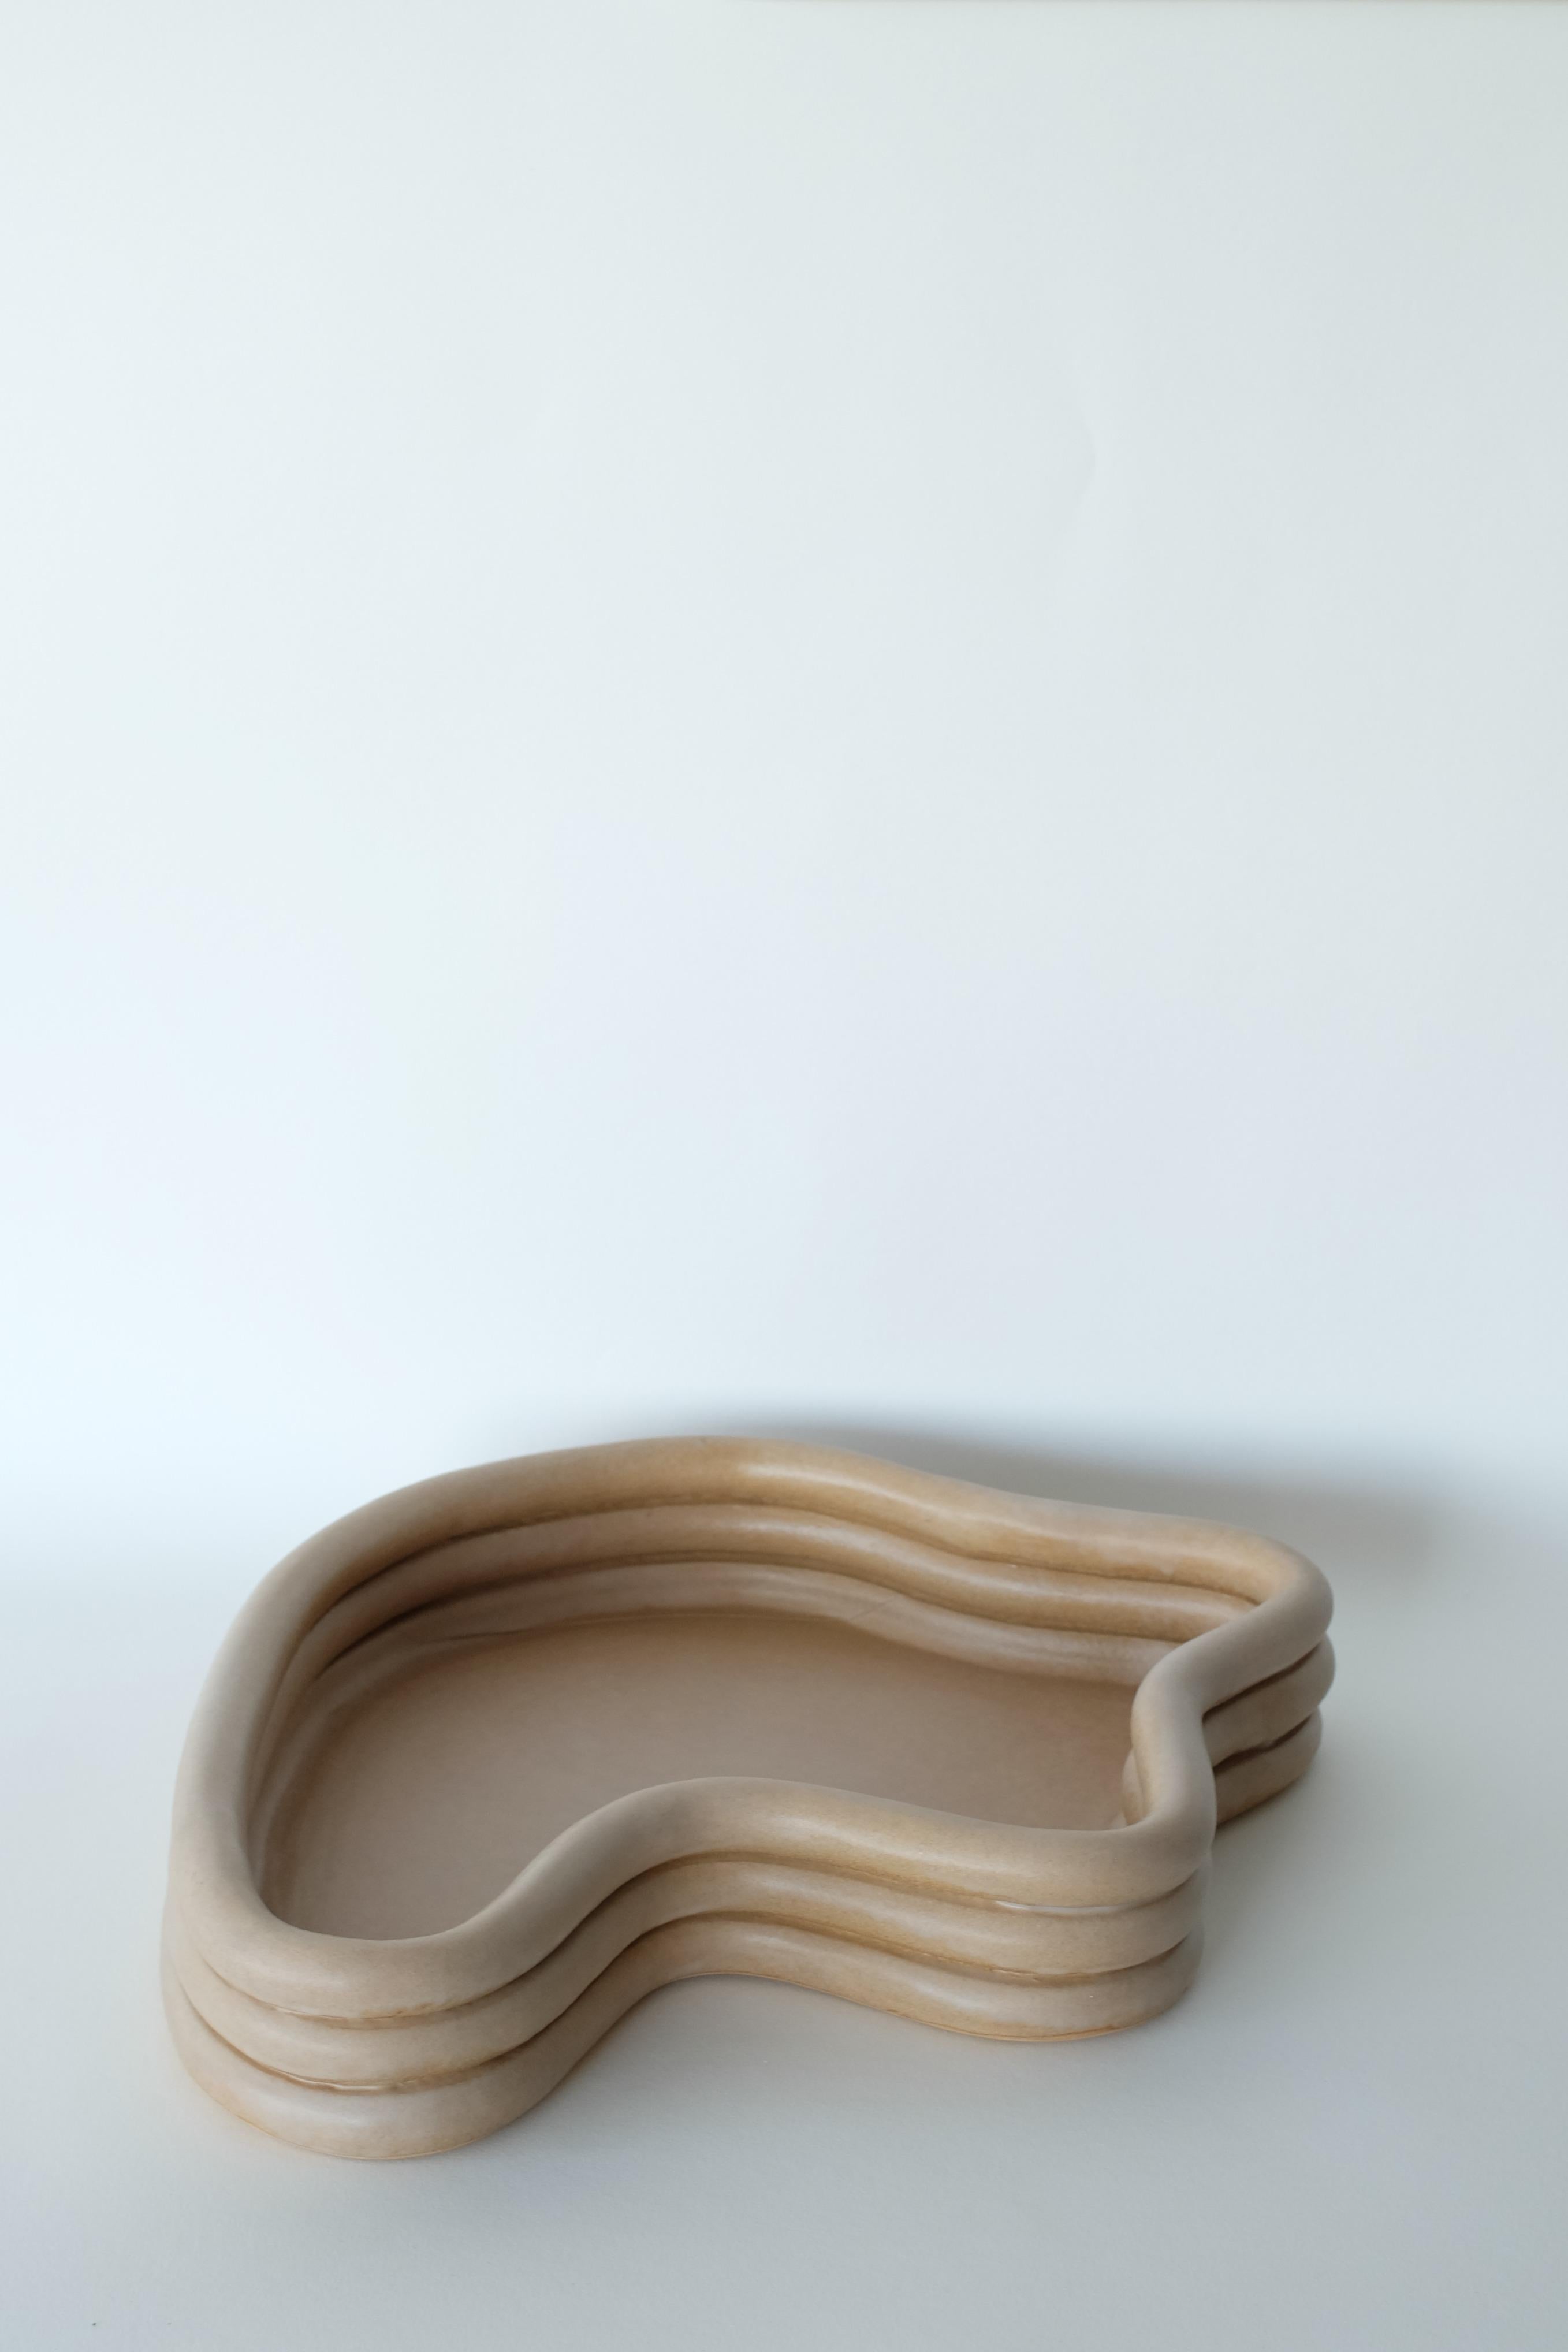 Mother table centerpiece by Sophie Parachey
Dimensions: W 37 x D 32 x H 8 cm
Materials: Sand stoneware, mate sage glaze.

Inspired by extended stays in Central America, Sophie Parachey’s work questions transformation, the antagonism between the